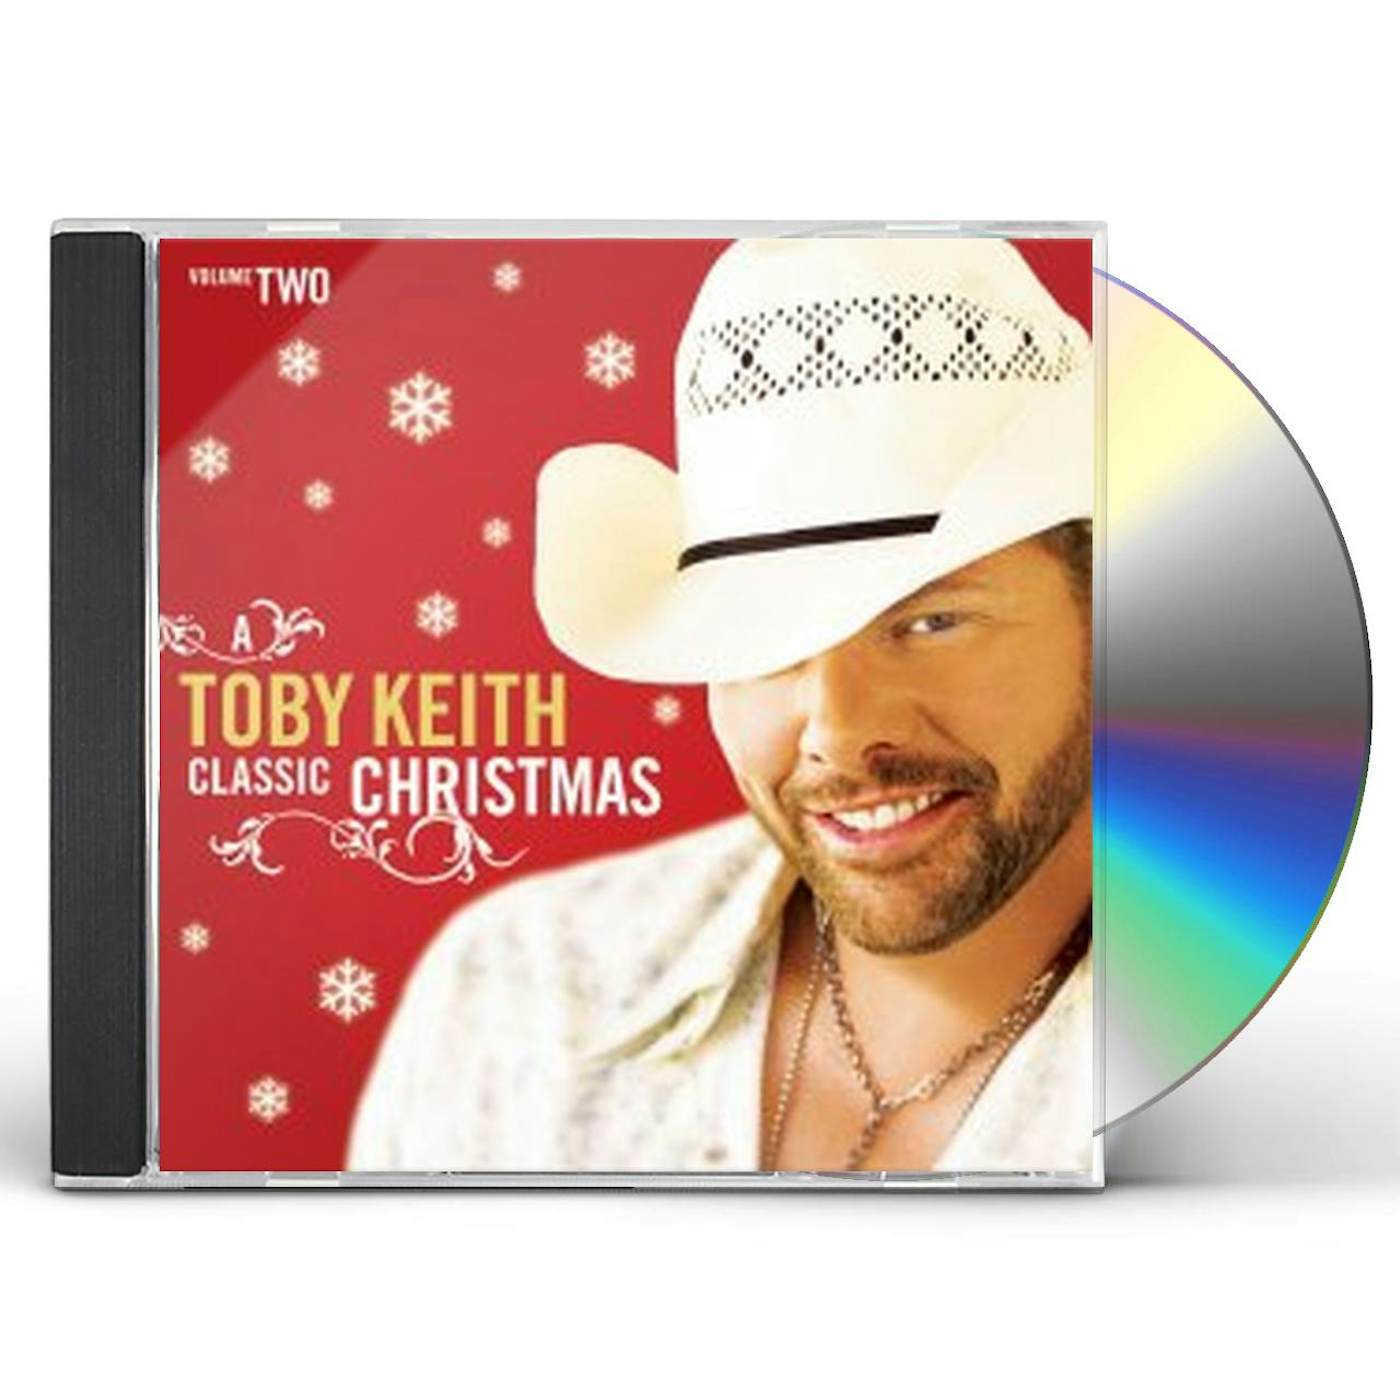 classic christmas 2 cd - Toby Keith